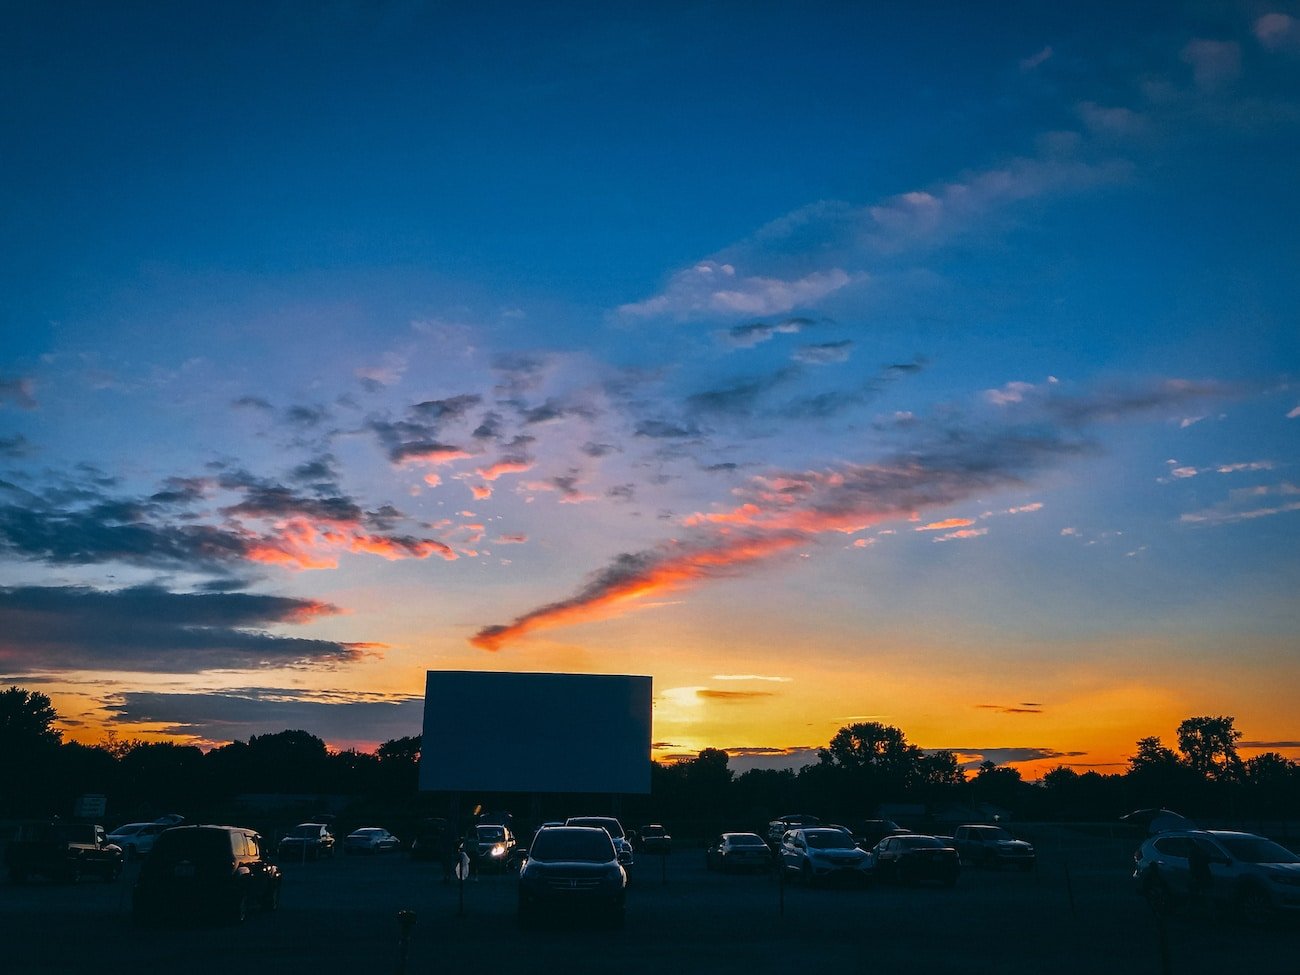 American Drive In Movie Theaters